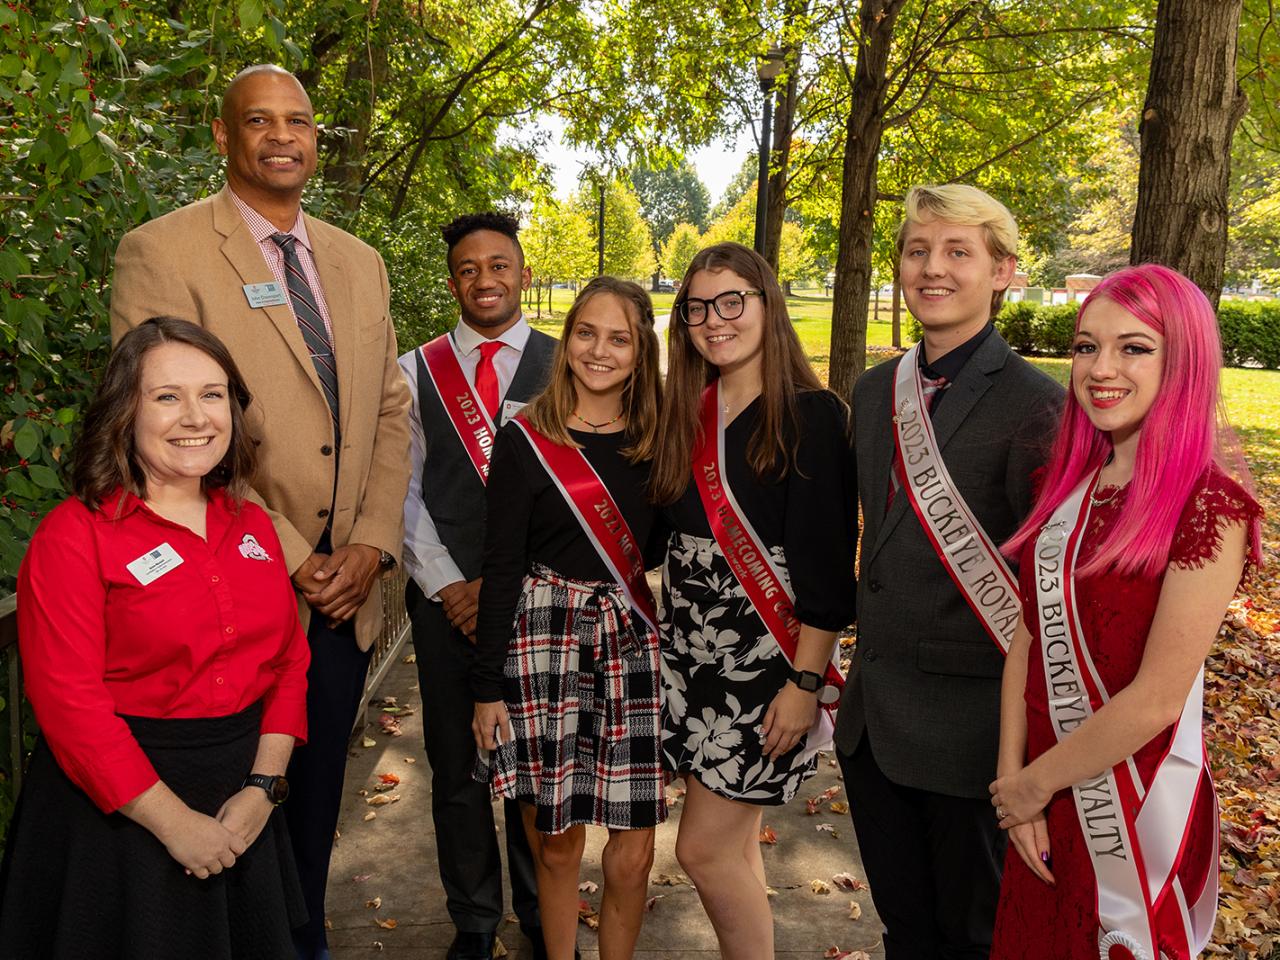 Homecoming court members and Office of Student Life staff members stand together for a photo outside.